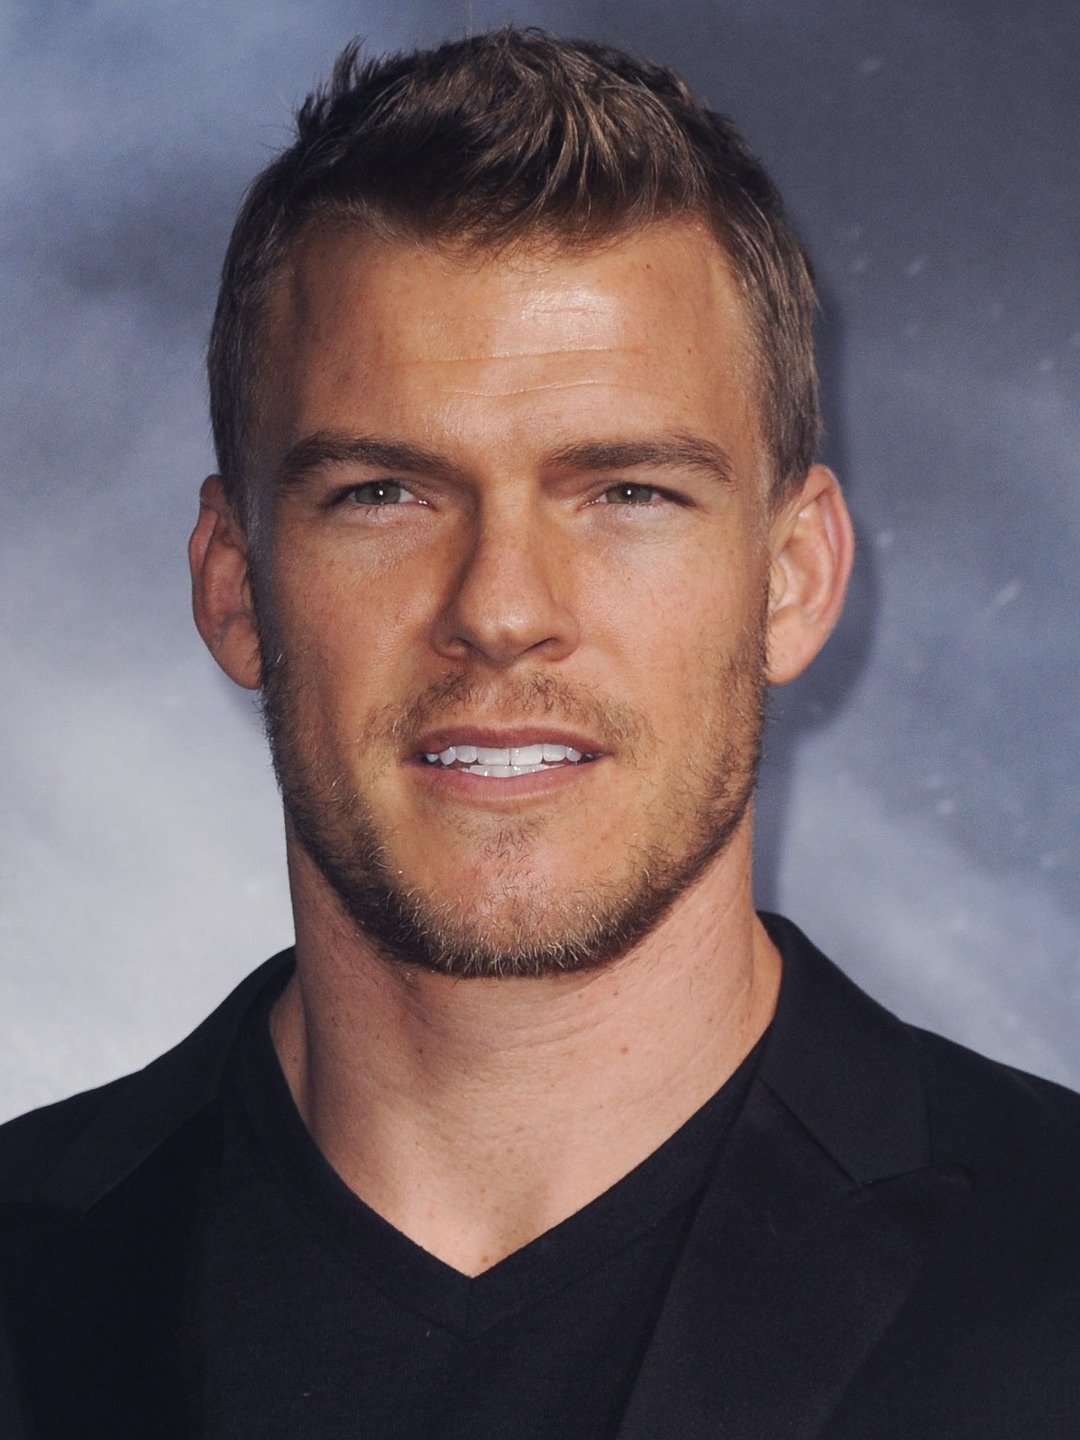 How tall is Alan Ritchson?